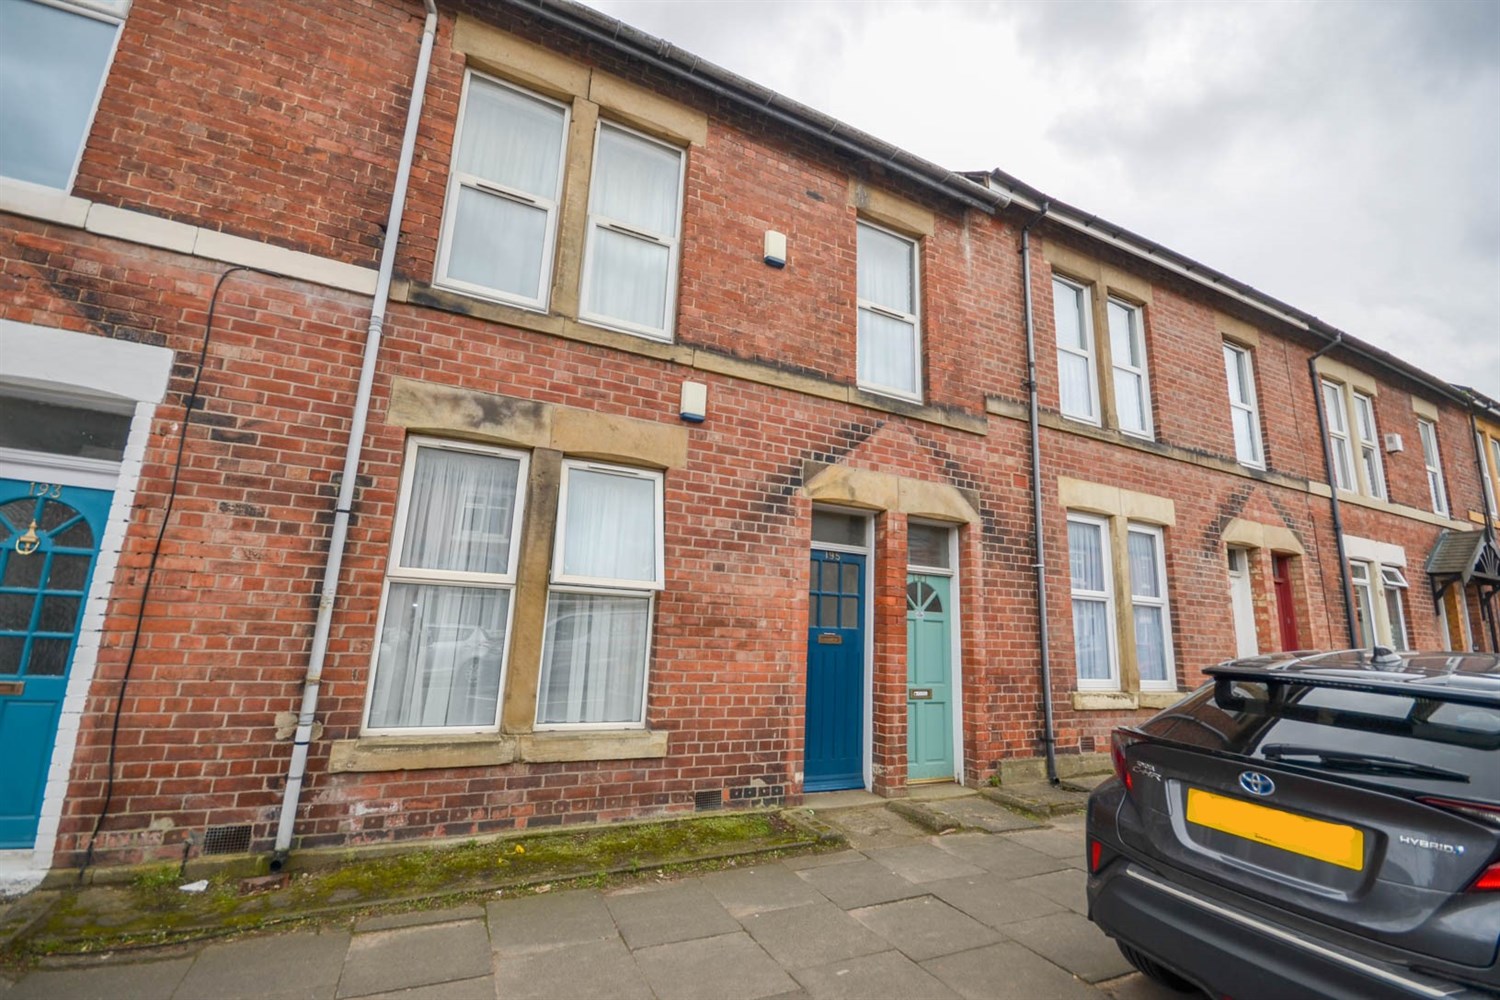 2 bed flat to rent in Salters Road, Gosforth - Property Image 1